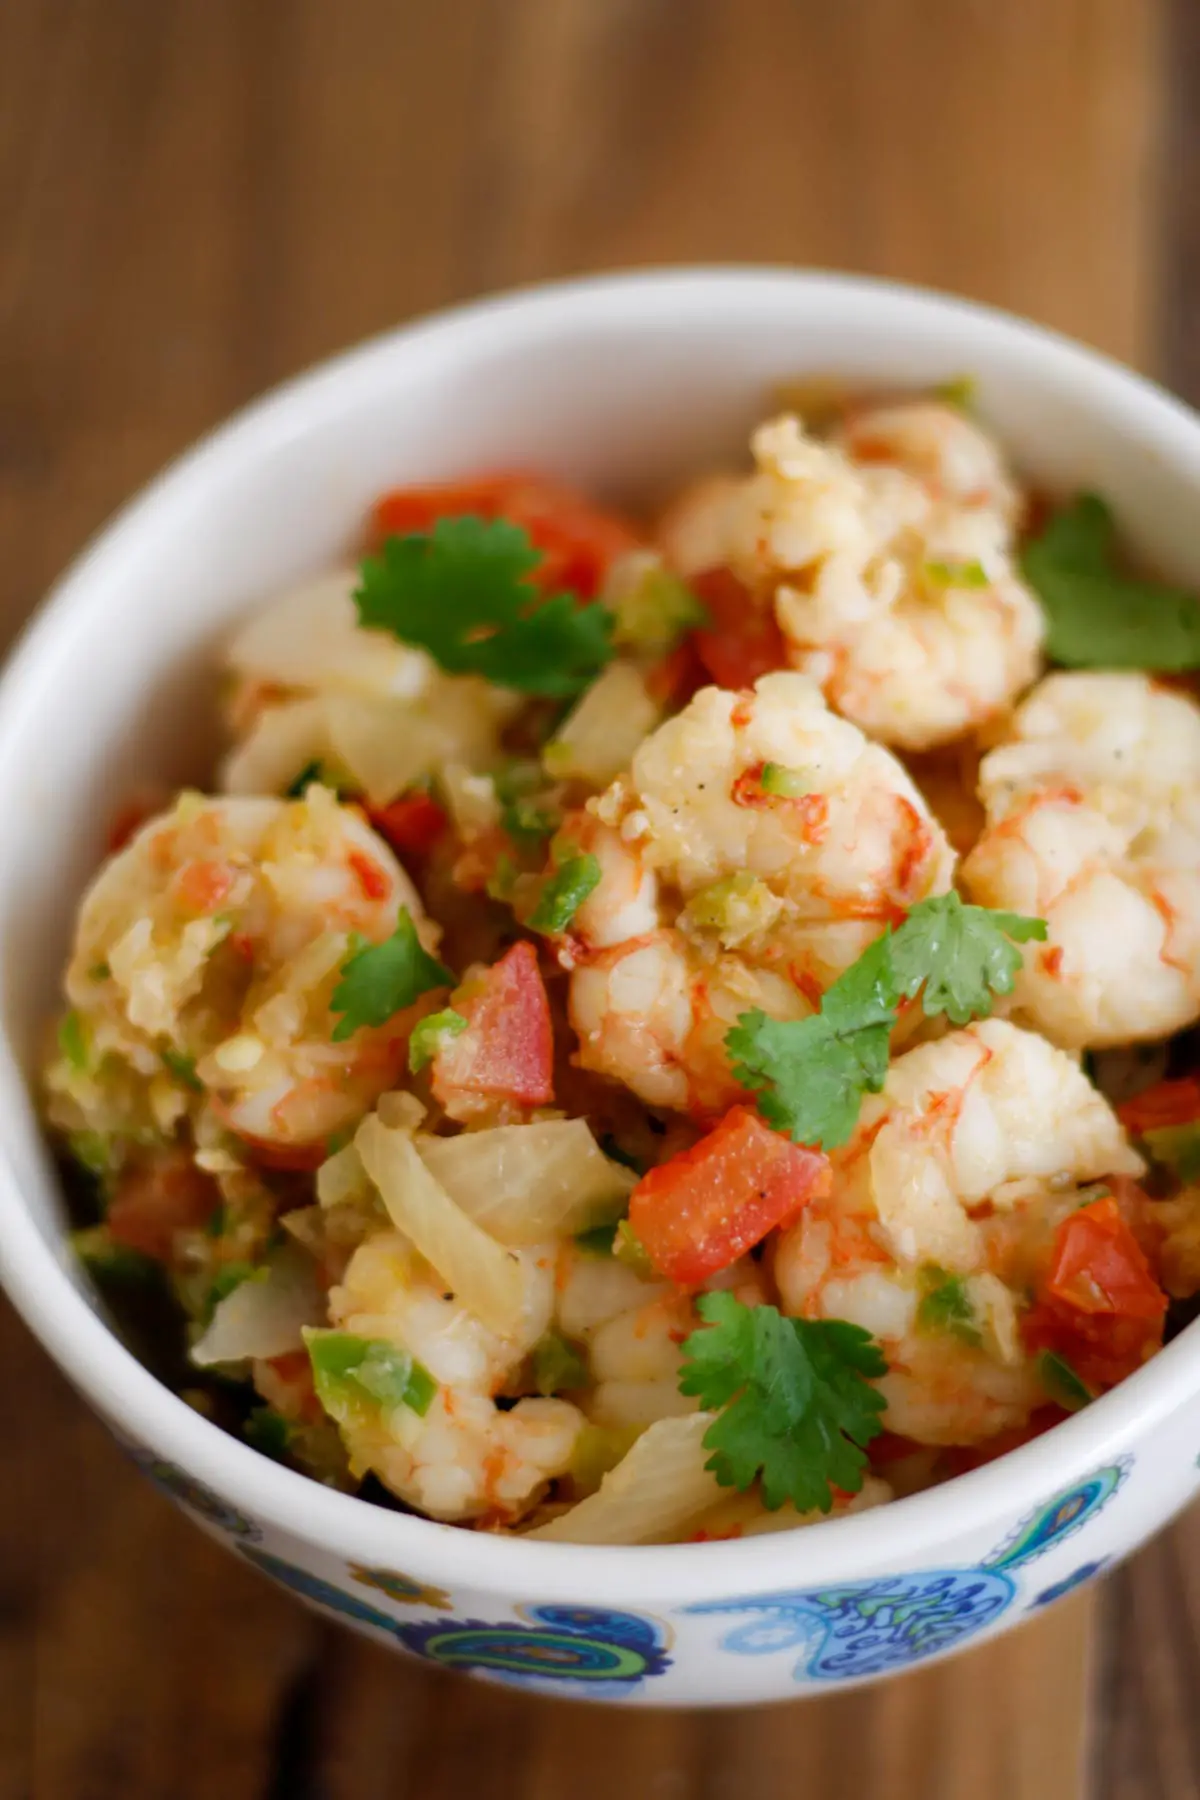 Shrimp with diced tomatoes, cilantro and onion in a white bowl with a blue paisley design